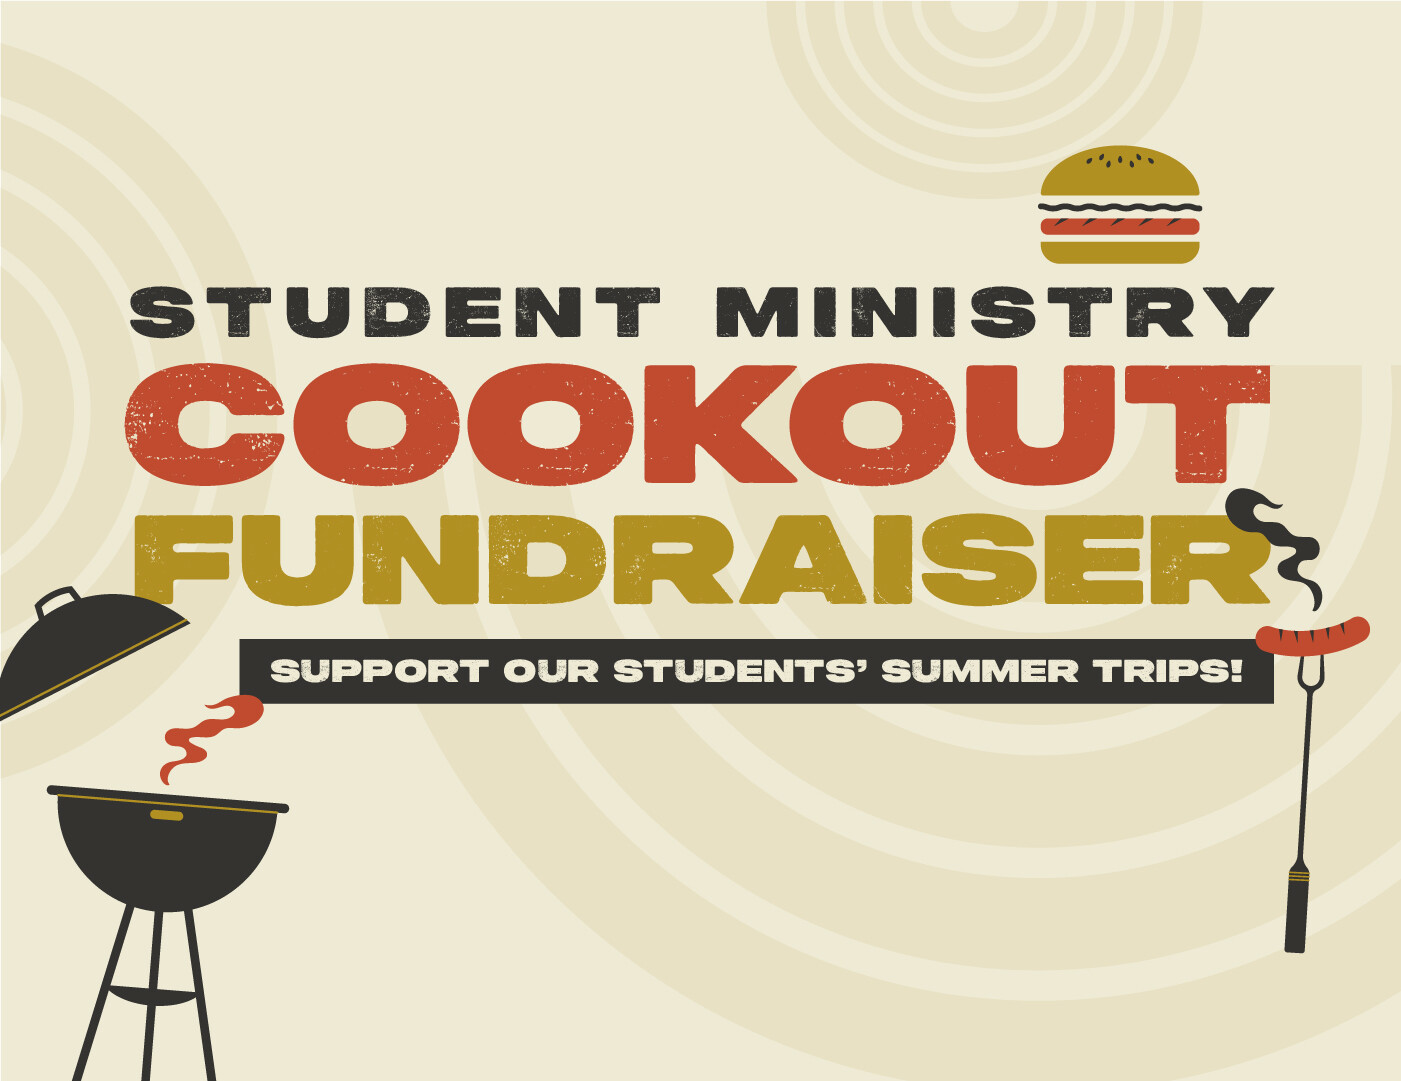 Student Ministry Cookout Fundraiser